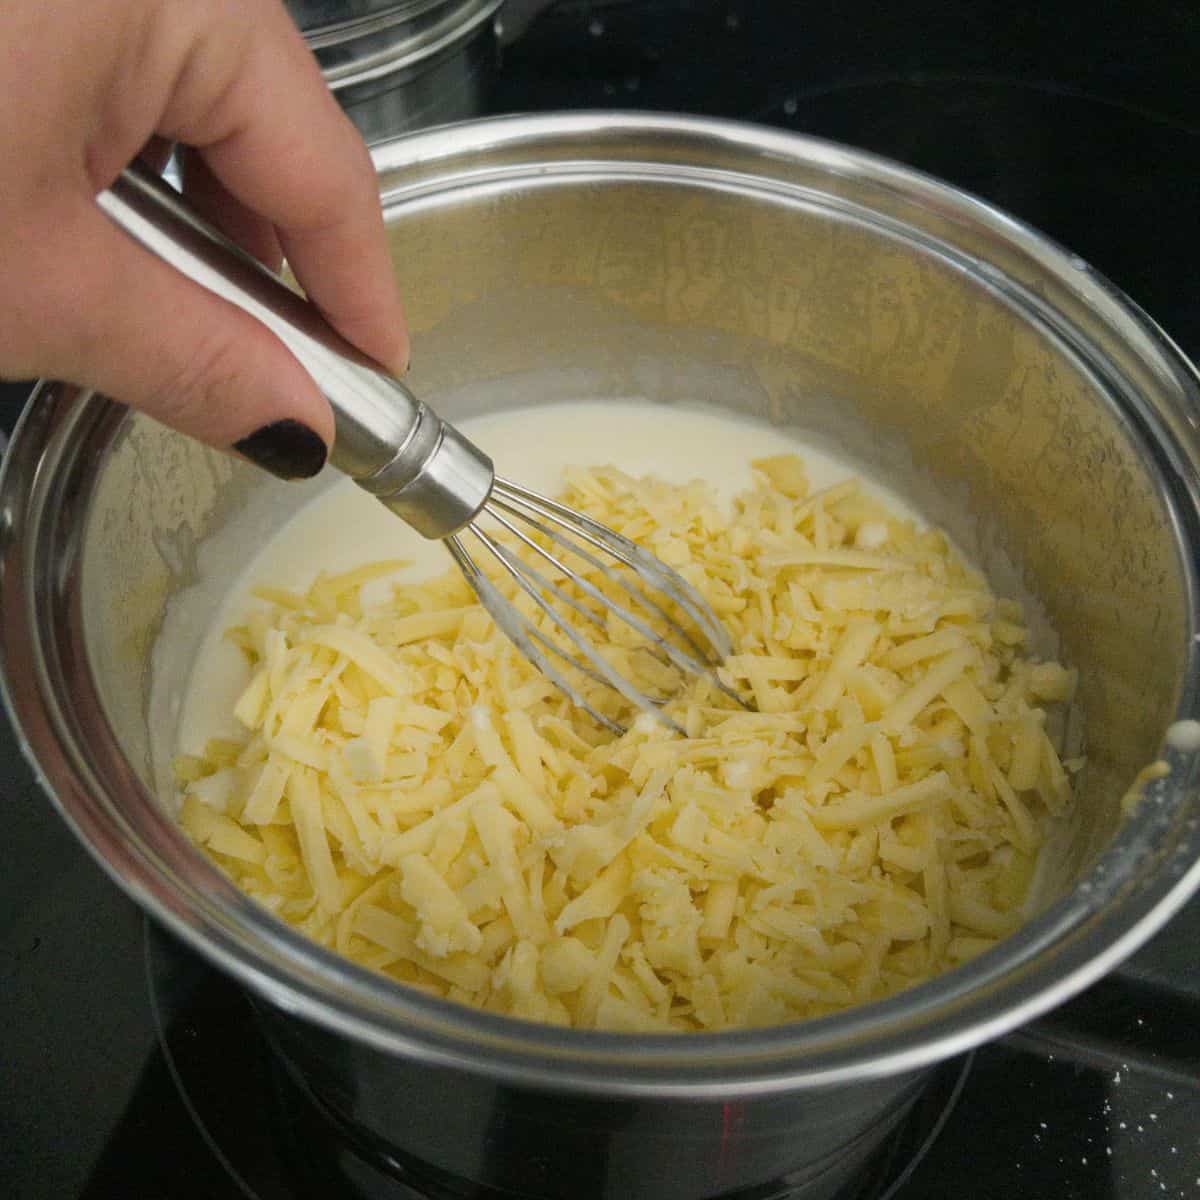 cheese sauce being made in a saucepan with cheese being whisked in.